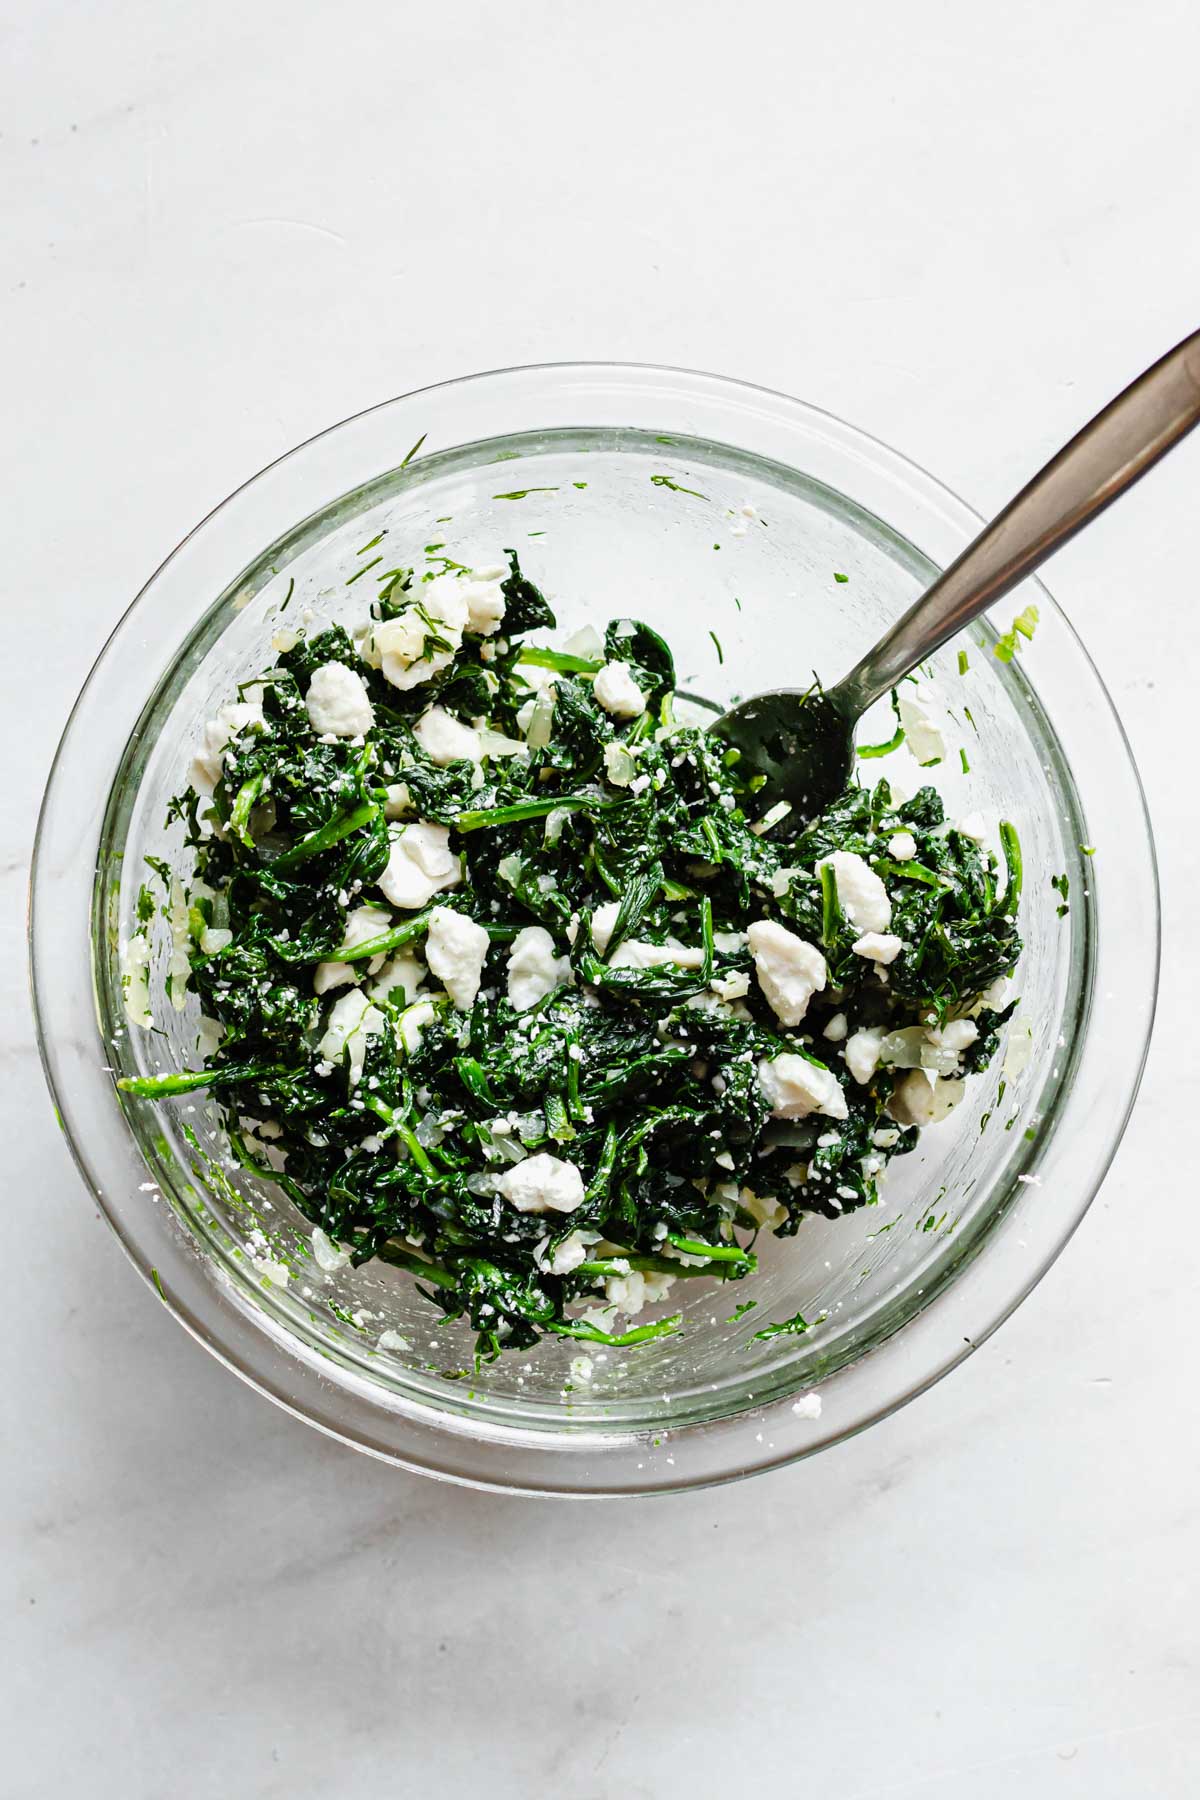 Feta cheese being mixed into the spinach.